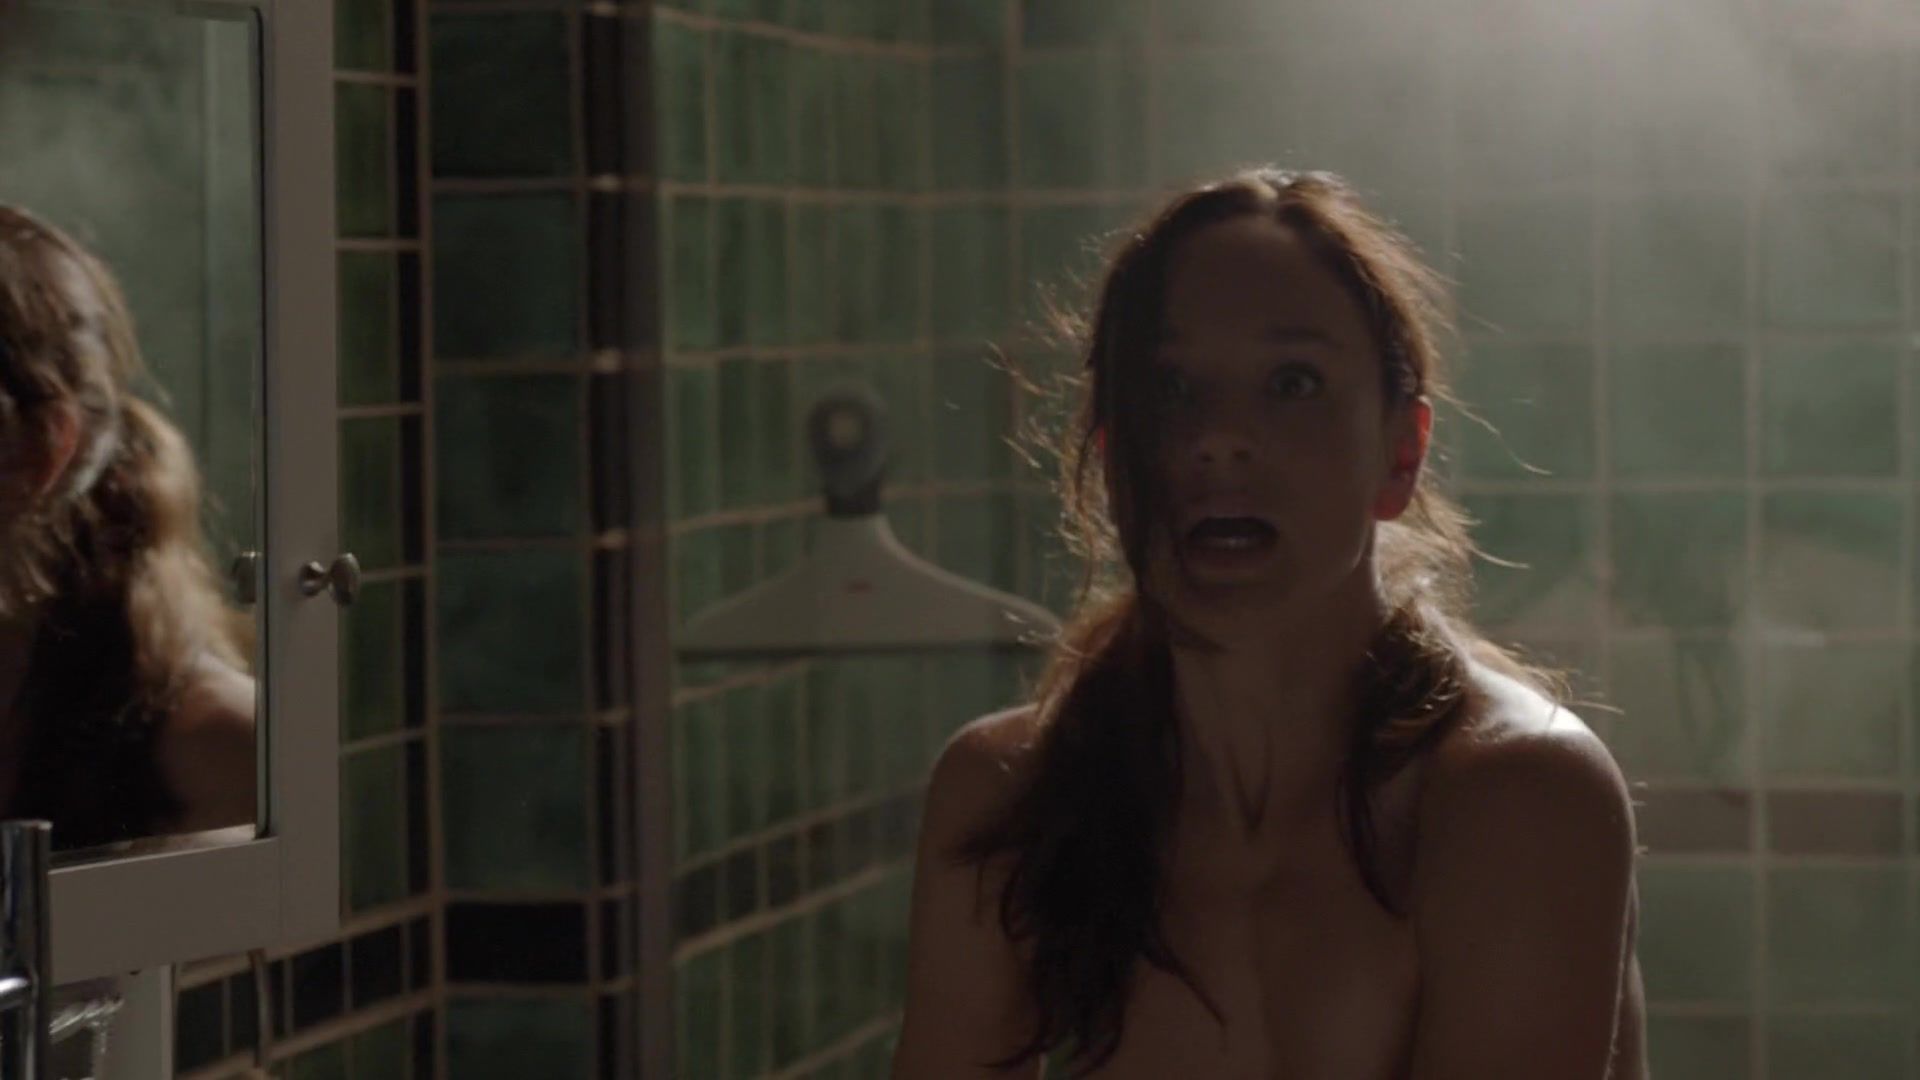 Girls Getting Fucked Naked Sarah Wayne Callies in Sex Scene from the TV show "Colony" s01e03 (2016) Charley Chase